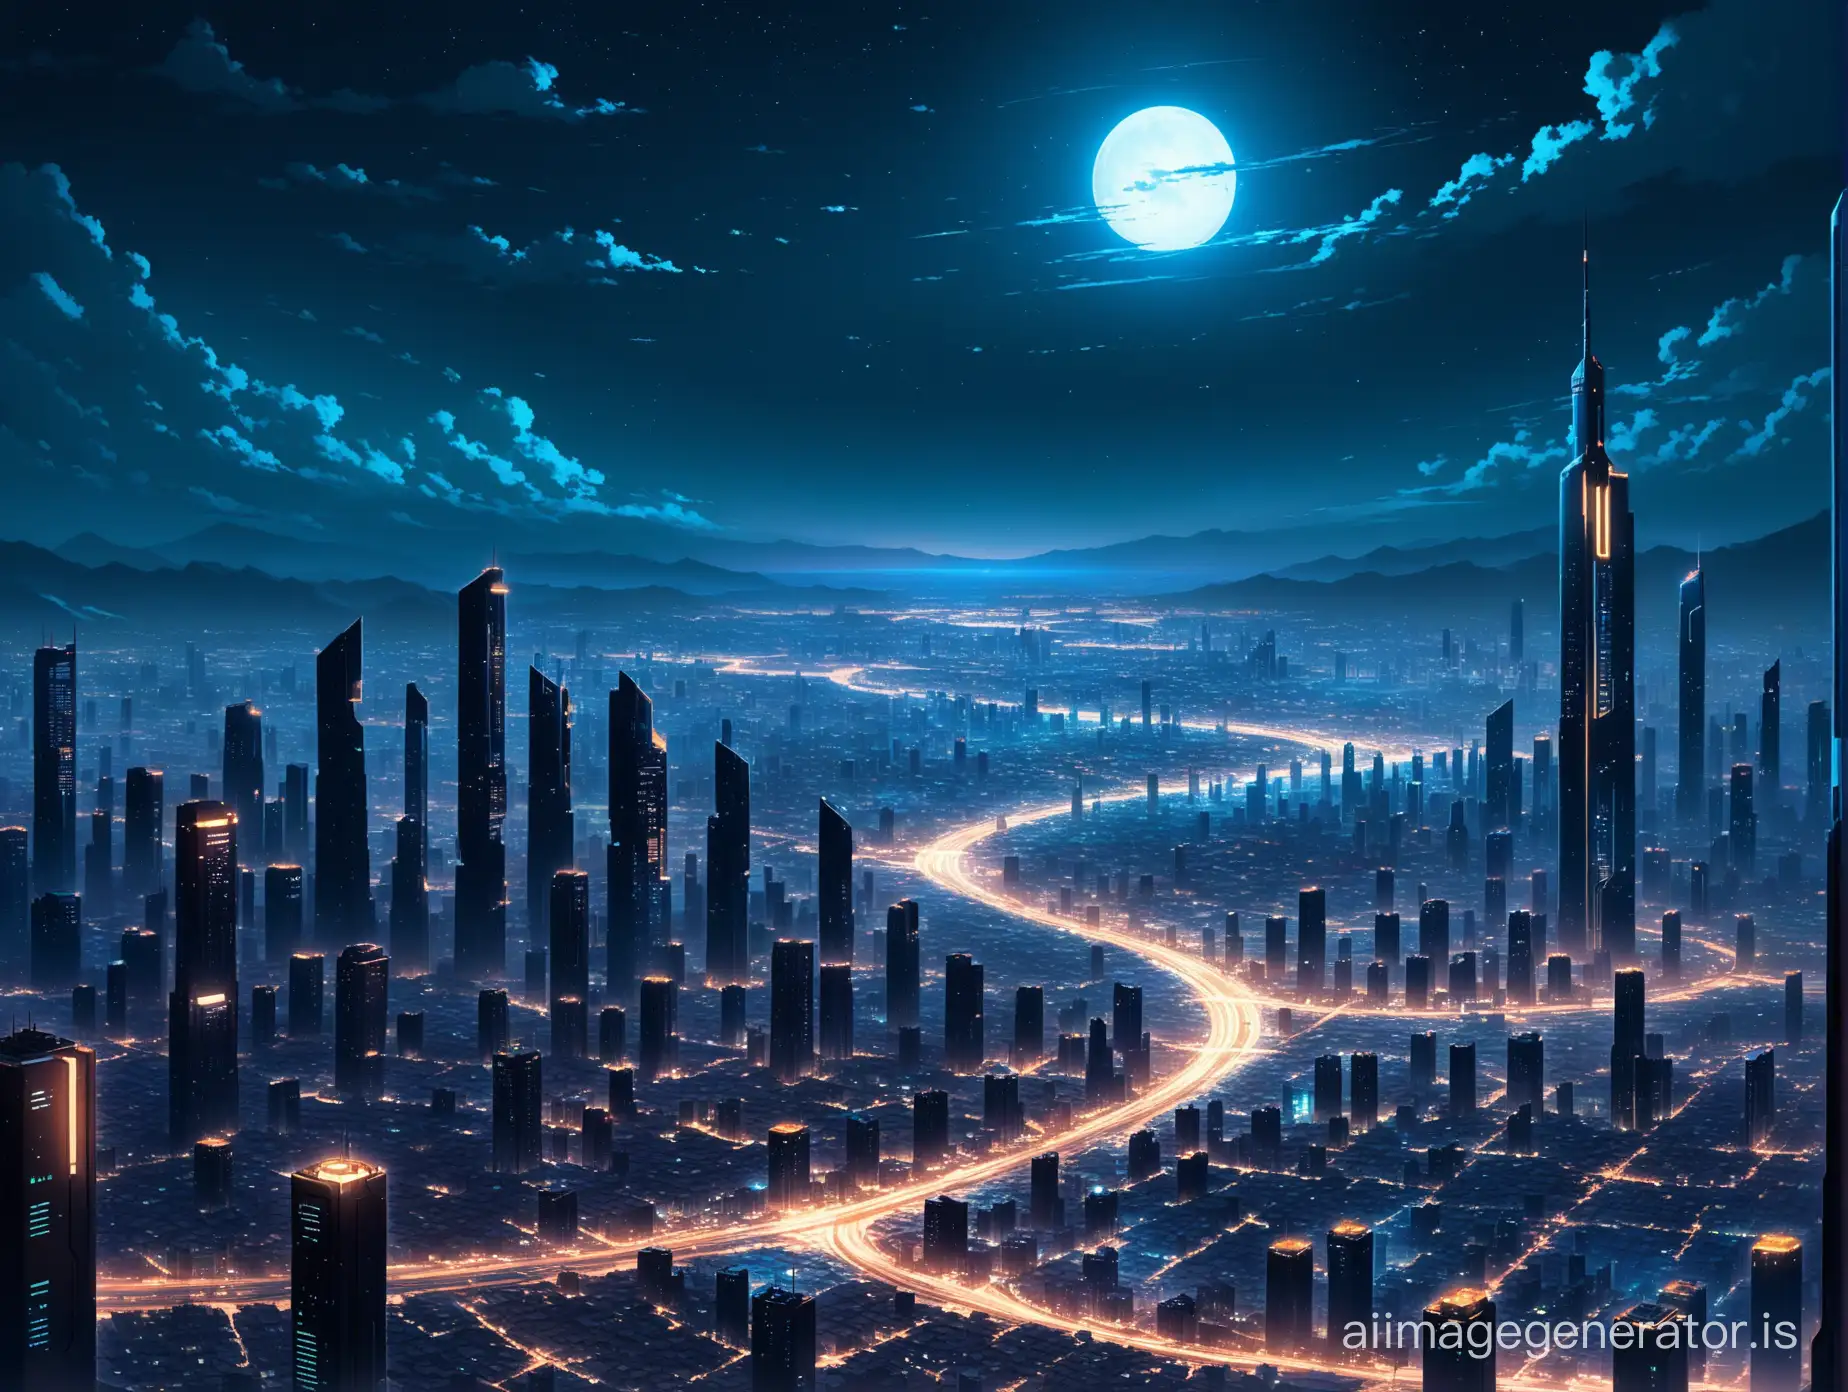 African-Futuristic-Night-Cityscape-with-Contrasting-Architecture